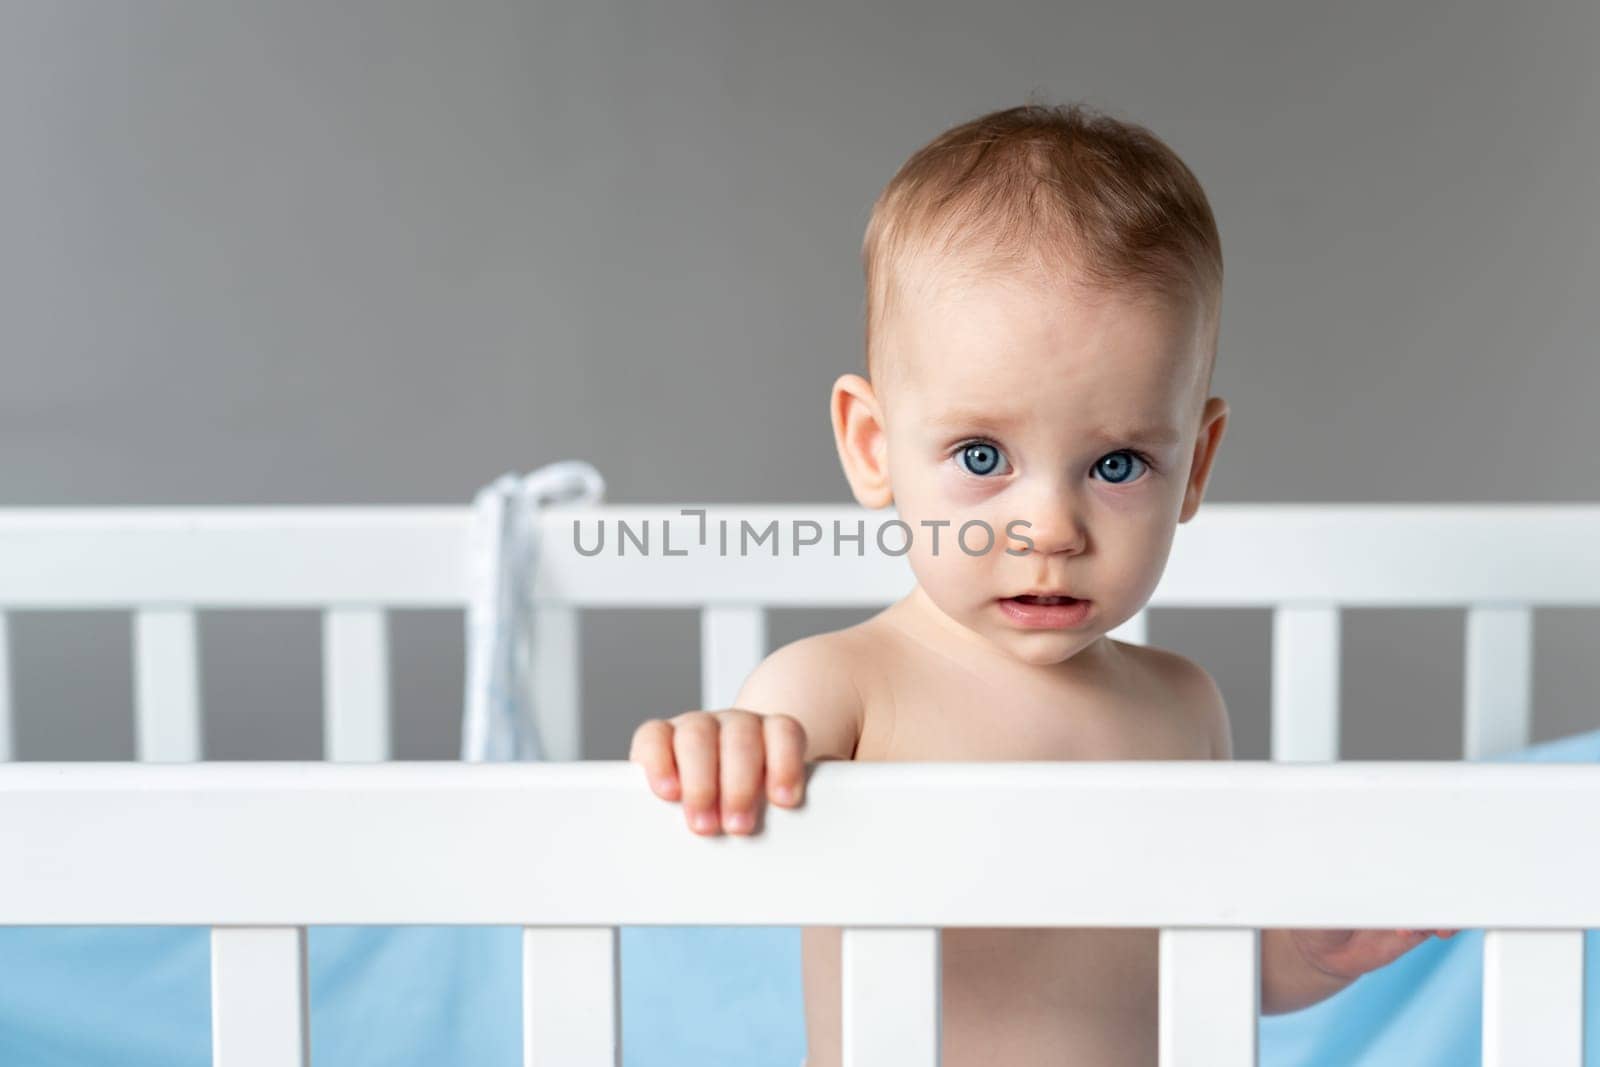 Sad baby girl stands gripping the rail of a white wooden crib, her eyes reflecting a sense of